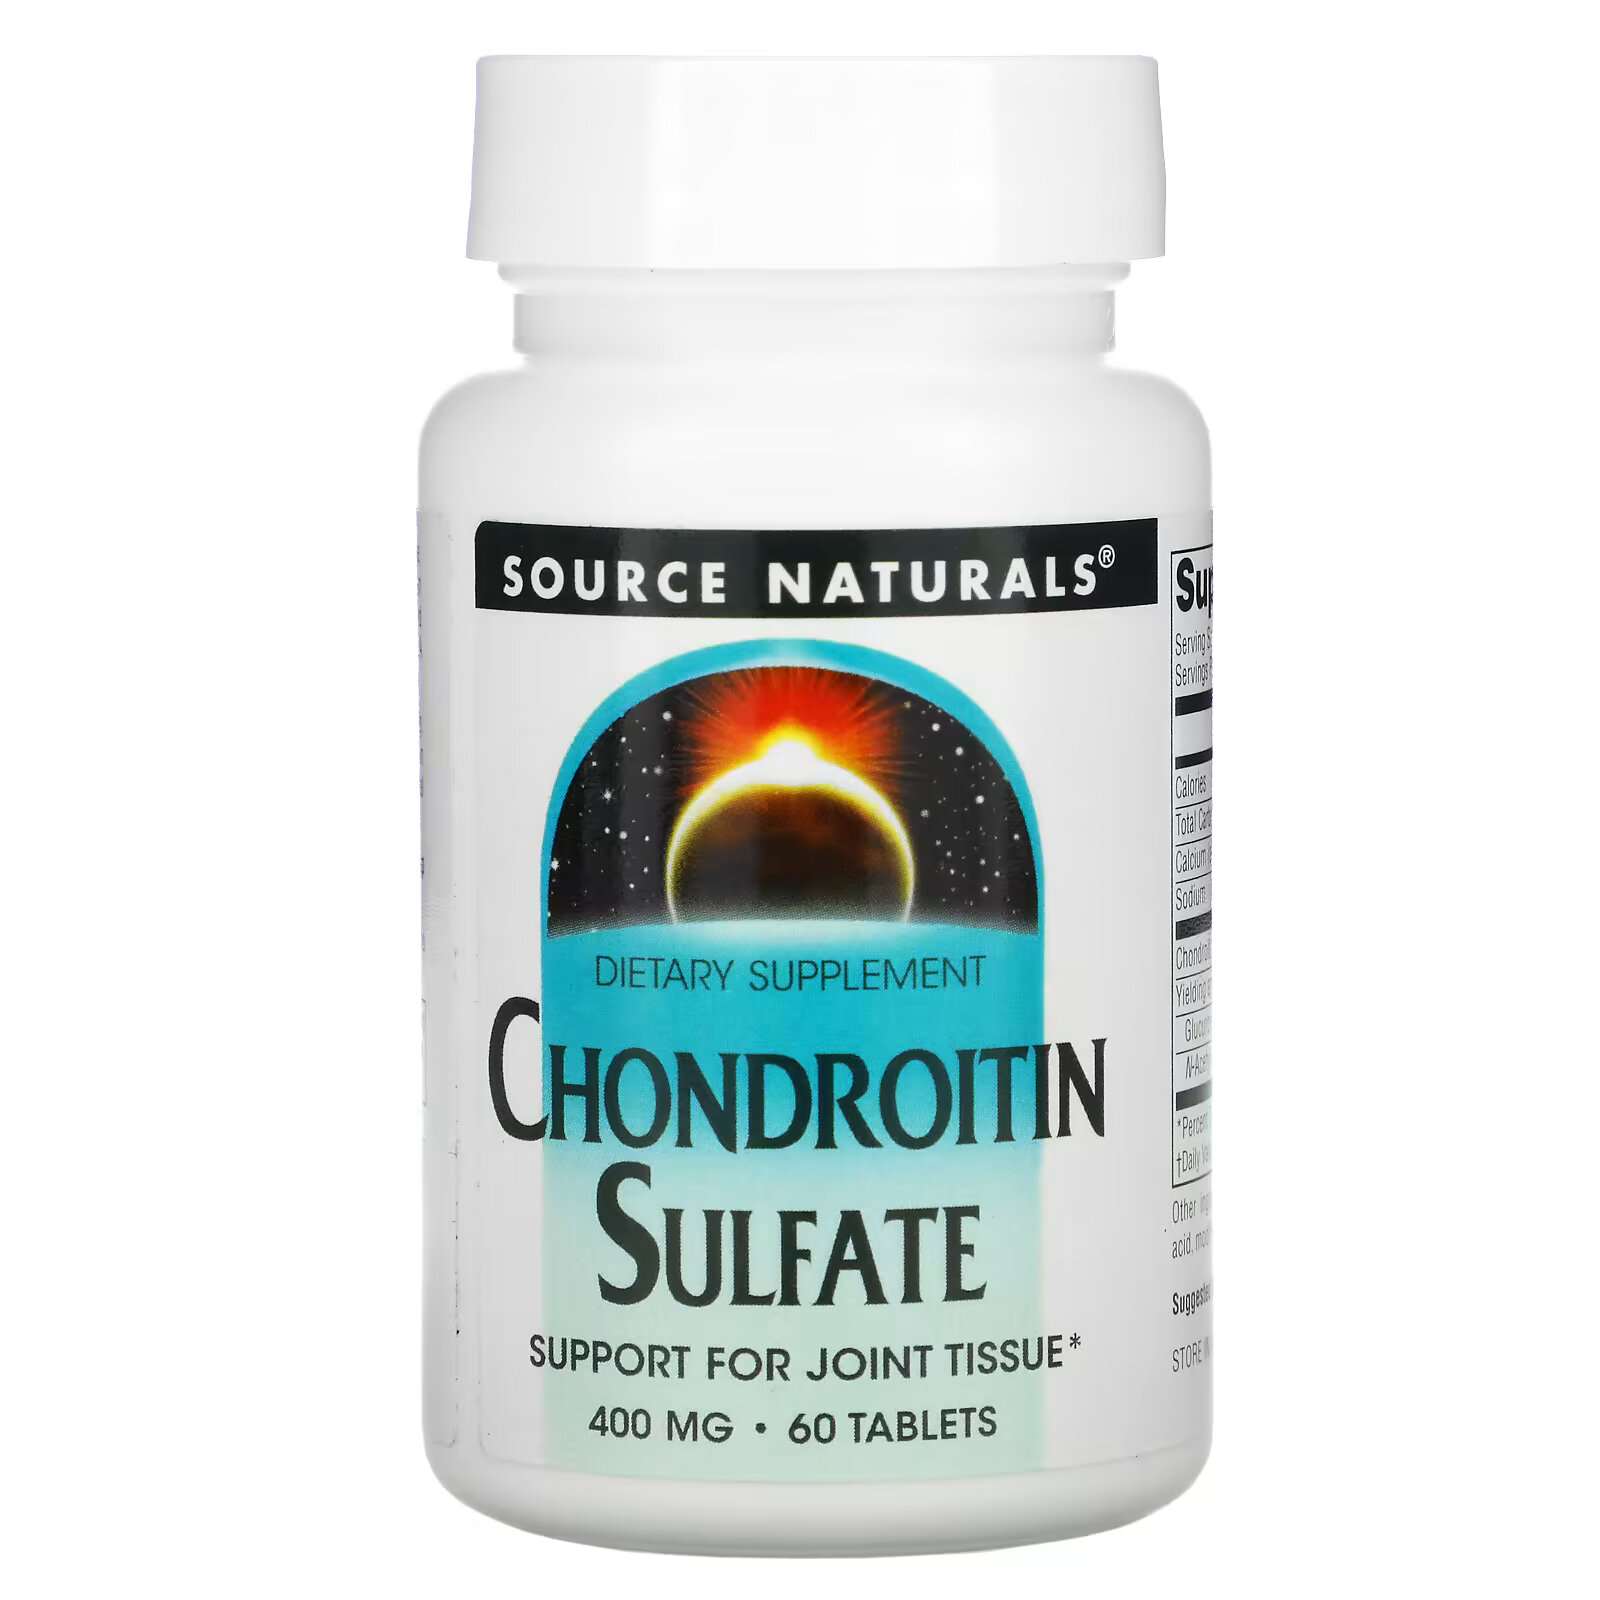 Source Naturals, Chondroitin Sulfate, 400 мг, 60 таблеток source naturals chondroitin sulfate 400 мг 60 таблеток